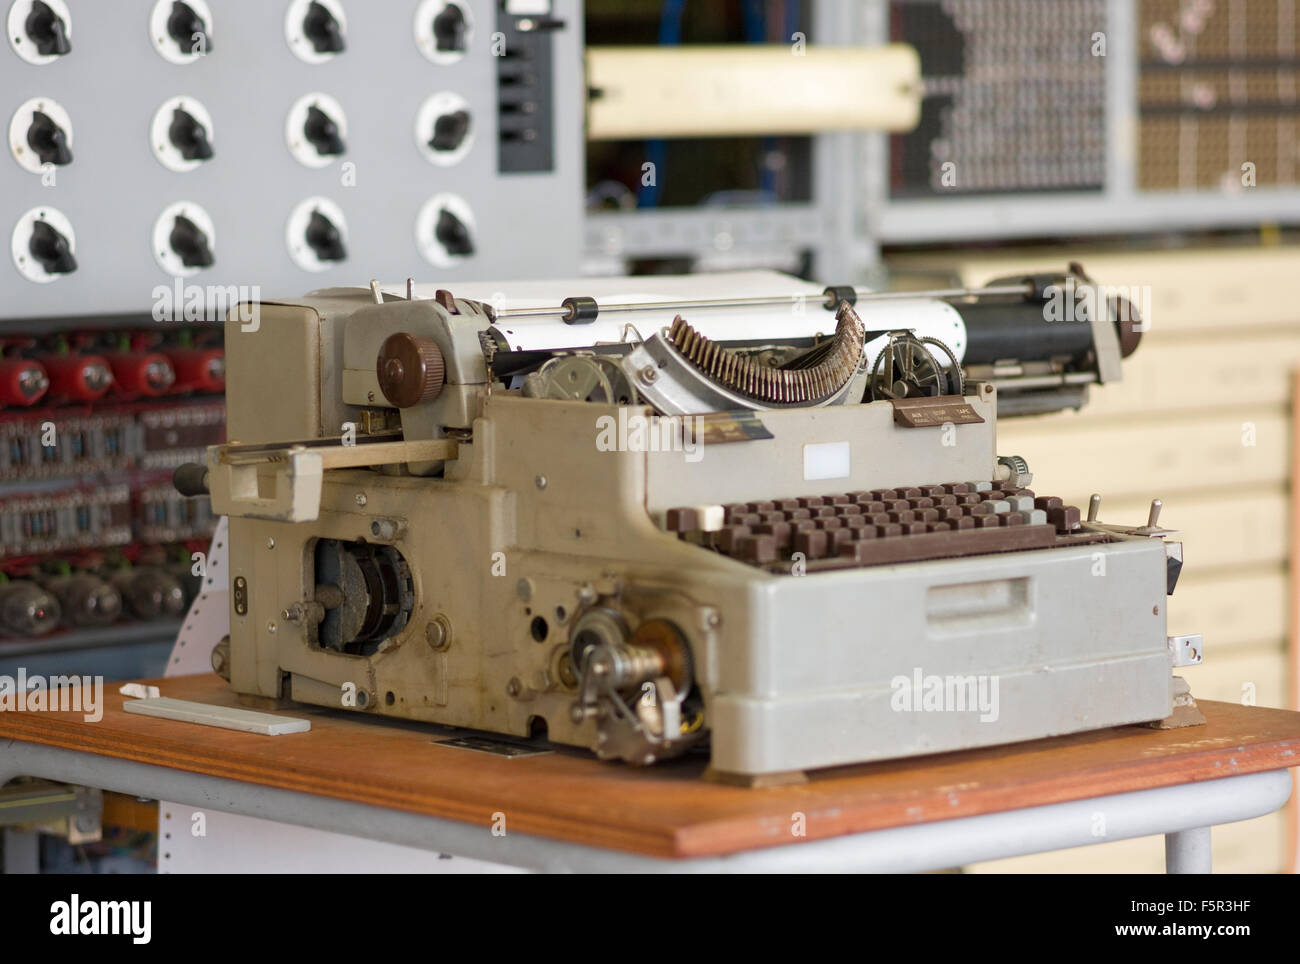 Teletype terminal connected to the Colossus rebuild at Bletchley Park used to decrypt German military messages during WWII Stock Photo